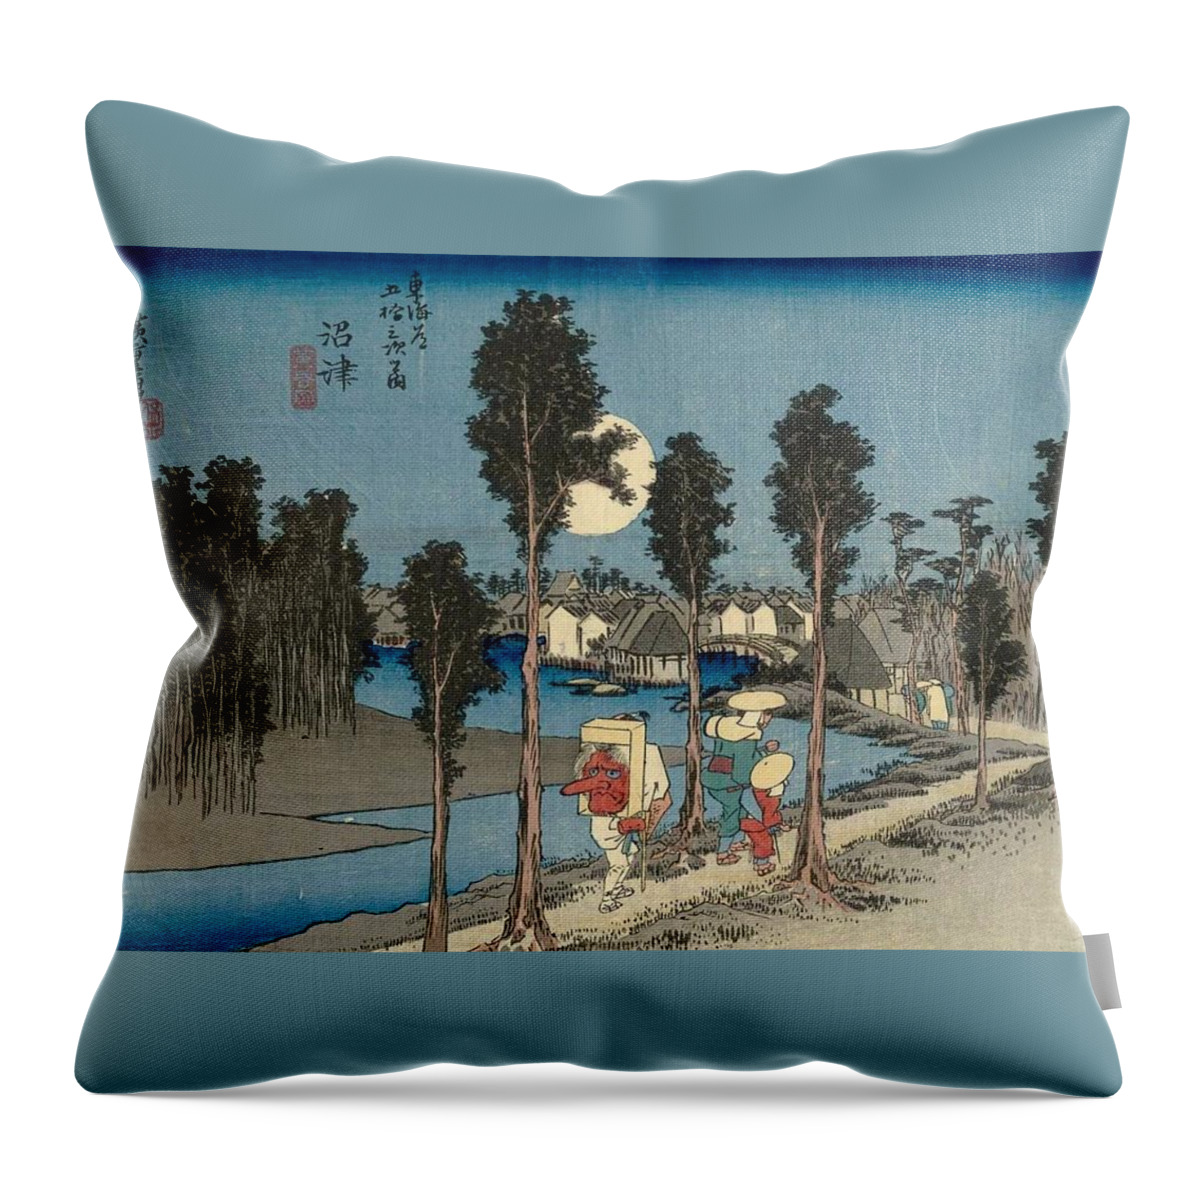 1833-1834 Throw Pillow featuring the painting Twilight by Utagawa Hiroshige